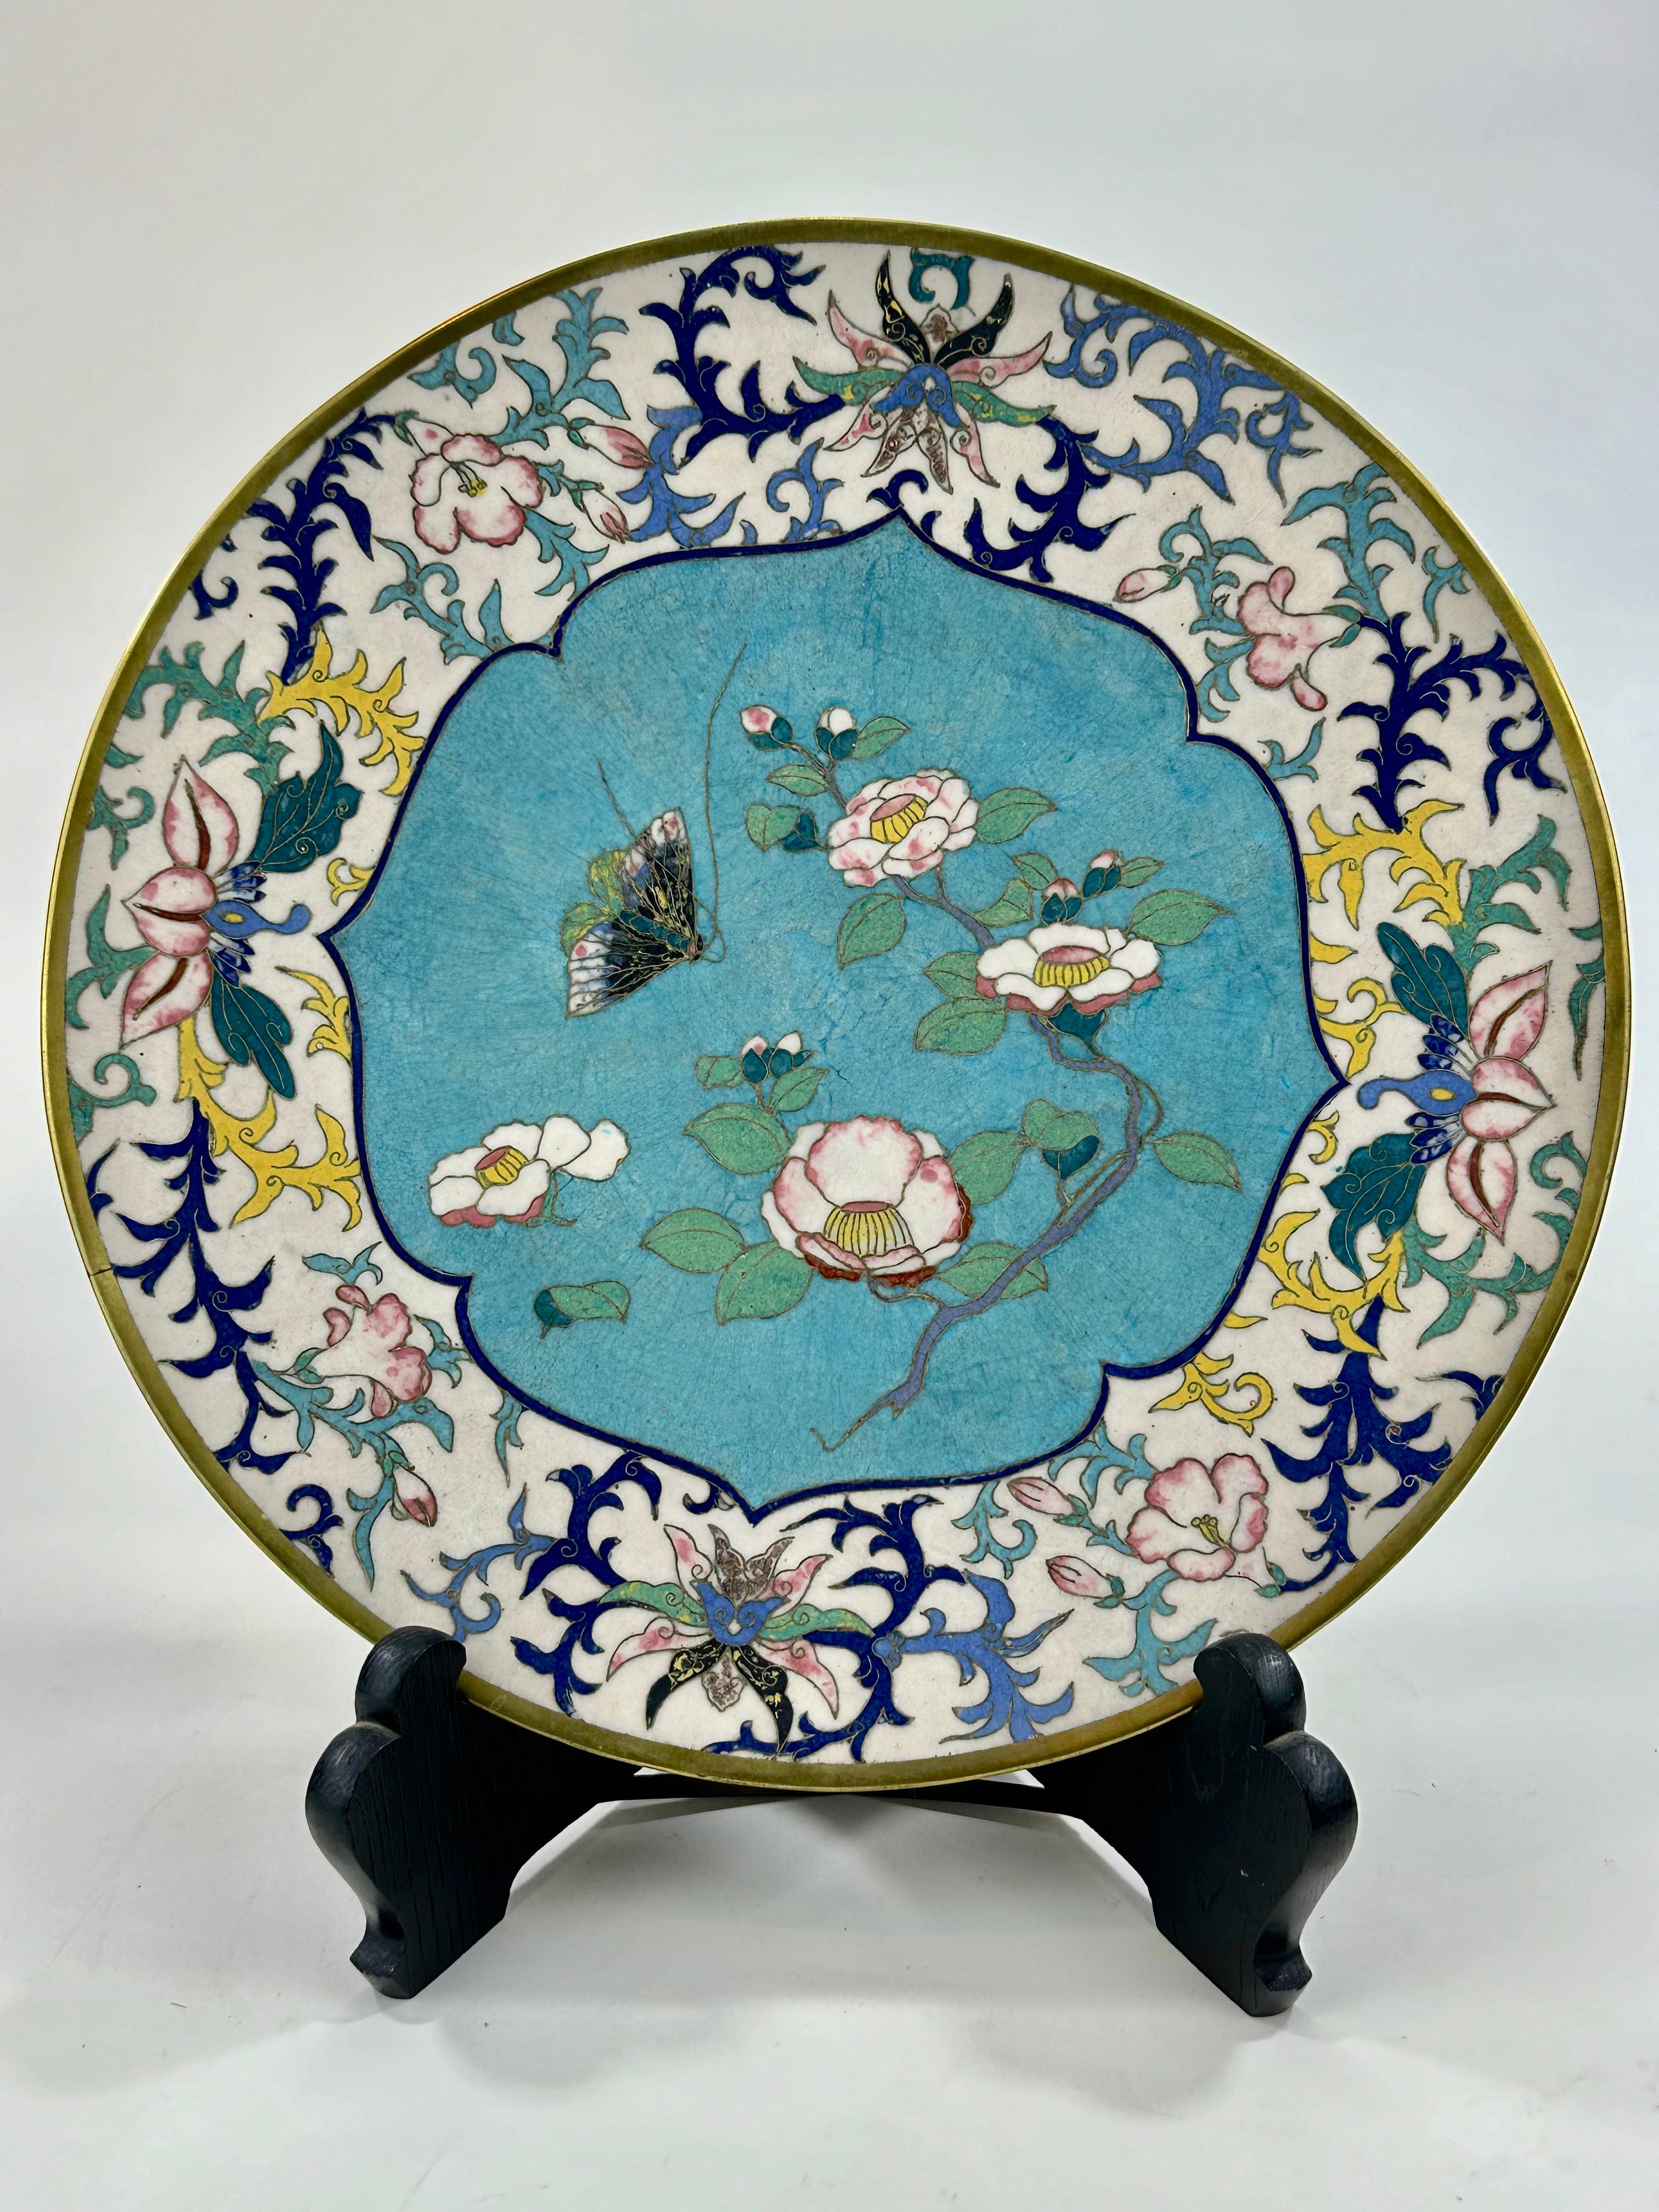 Available from Shogun's Gallery in Portland, Oregon for over 40 years specializing in Asian Arts & Antiques.

This is a rare Japanese Meiji era (c. 1880's) ornate Cloisonné charger (plate. Made copper alloys and vitreous glass enamel. Intricately